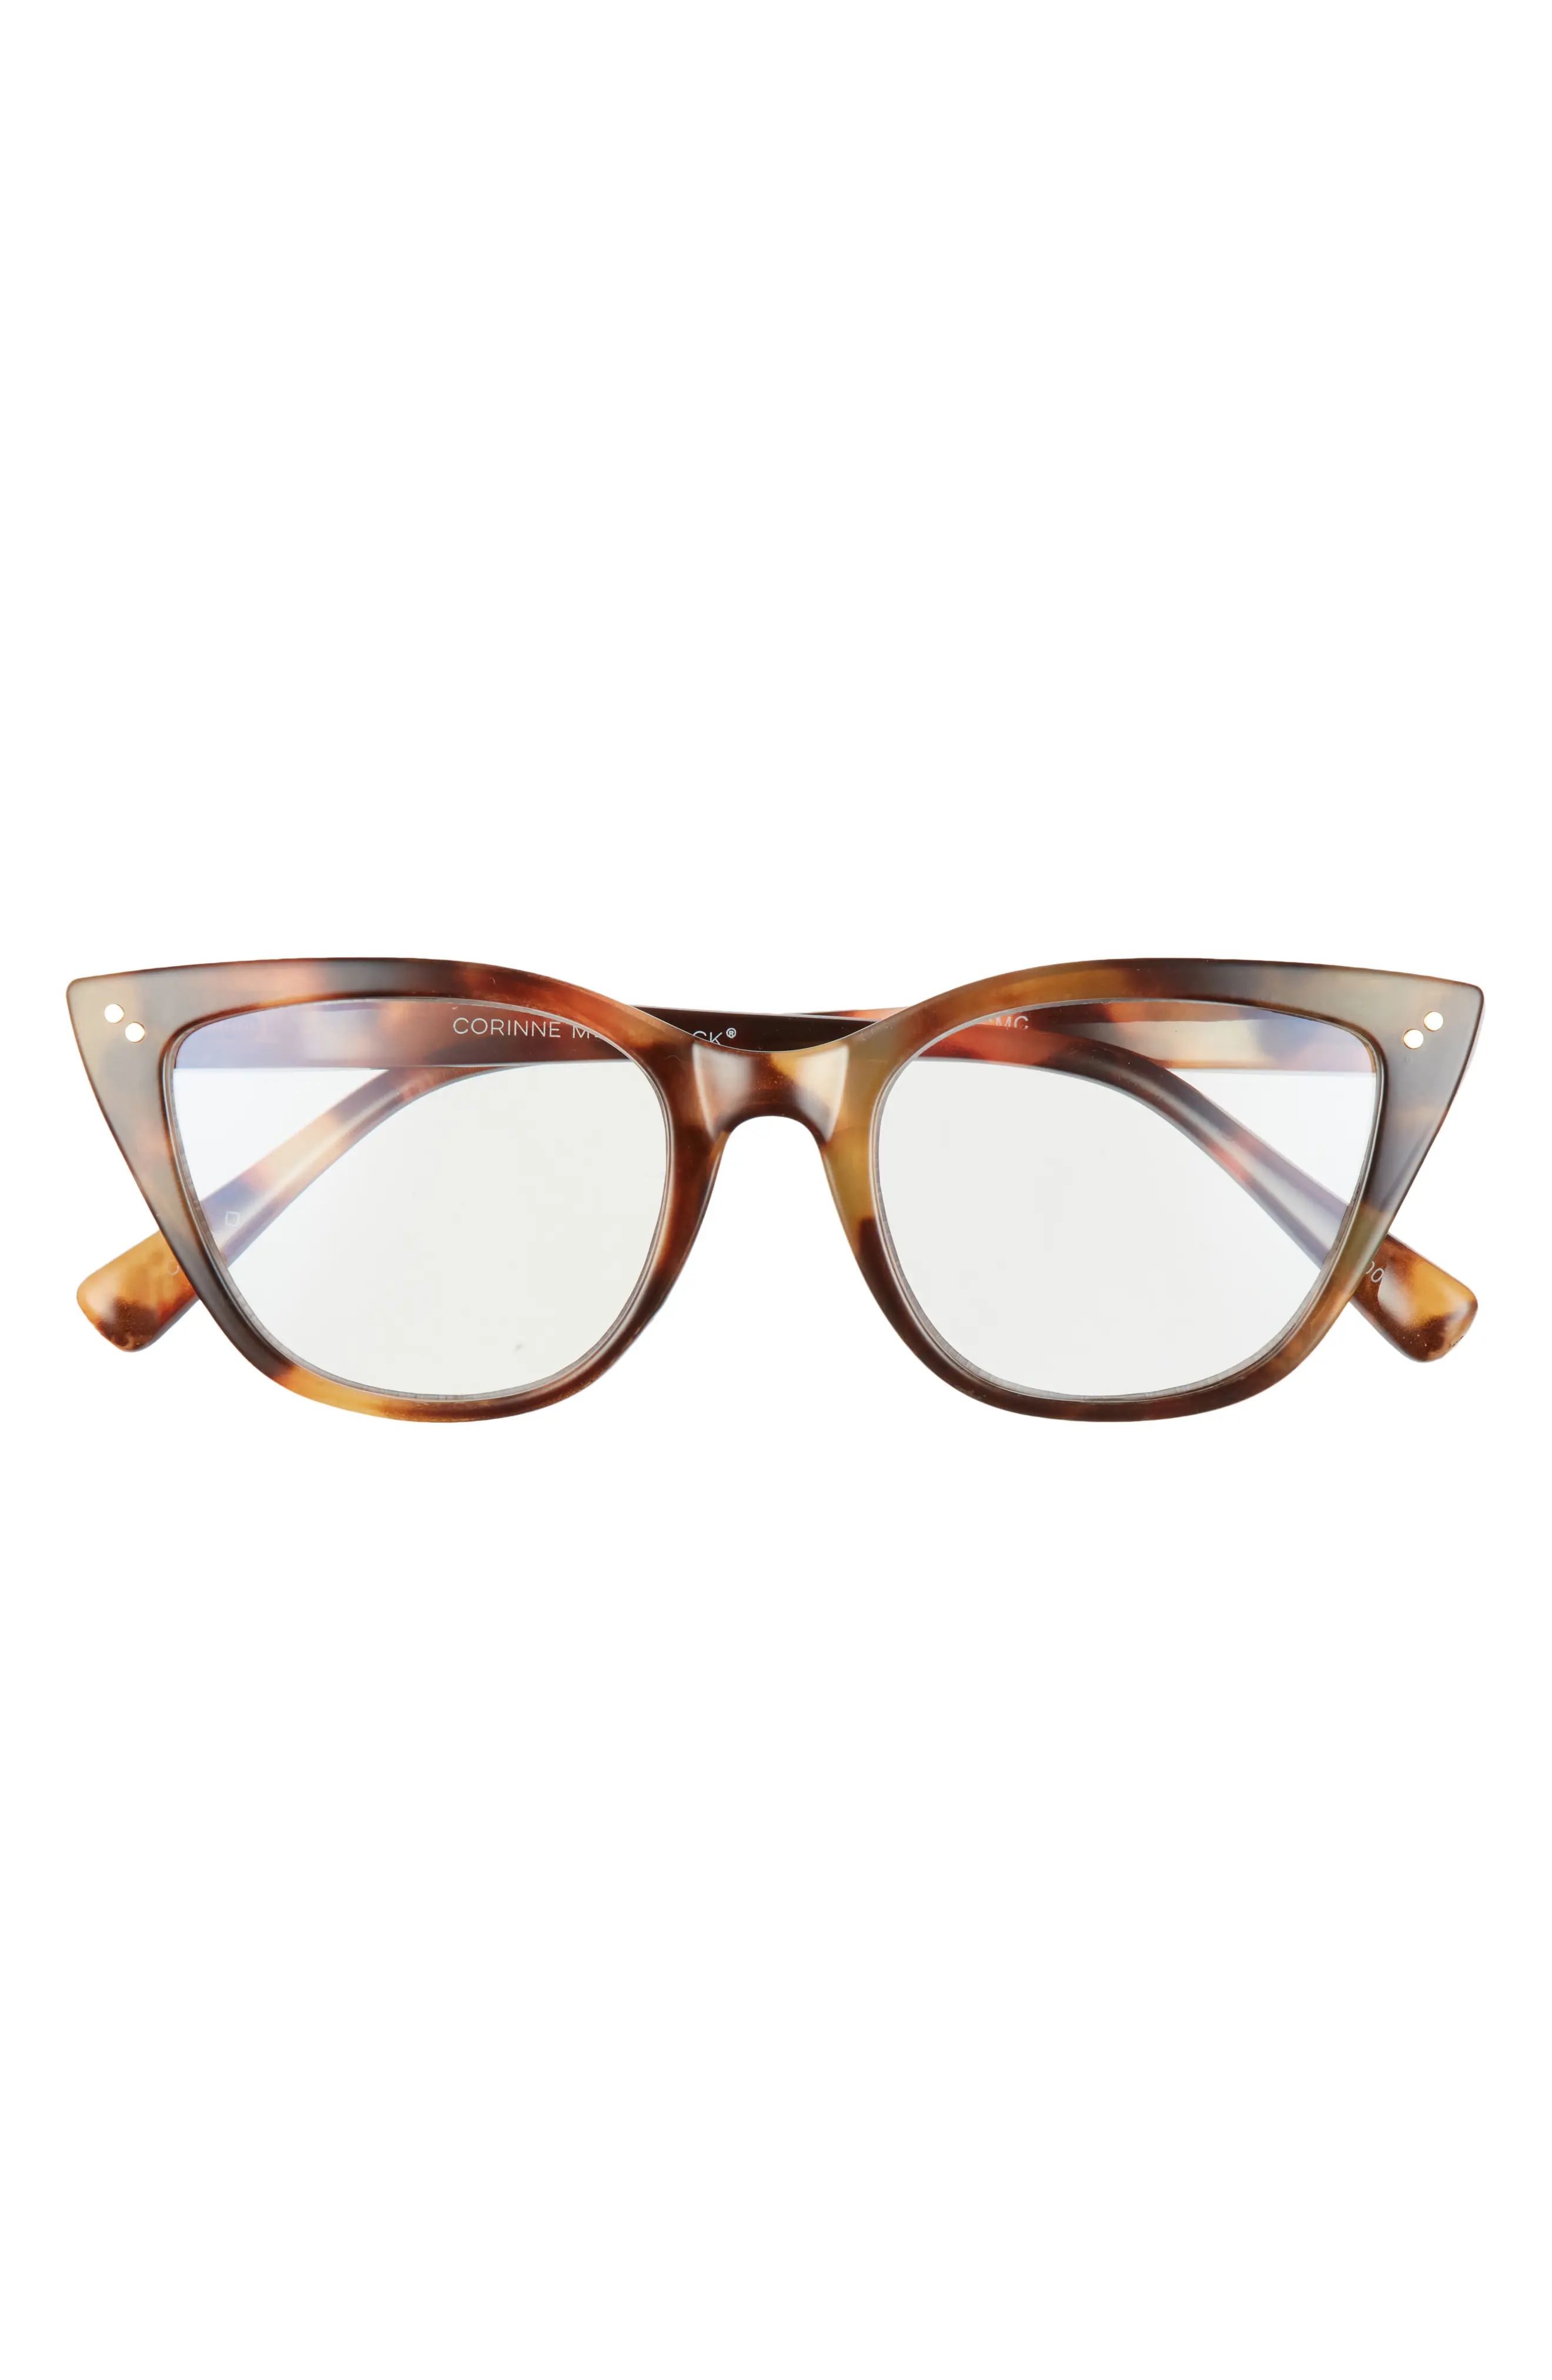 Corinne McCormack Siggy 50mm Blue Light Blocking Reading Glasses in Shell/Clear at Nordstrom, Size + | Nordstrom